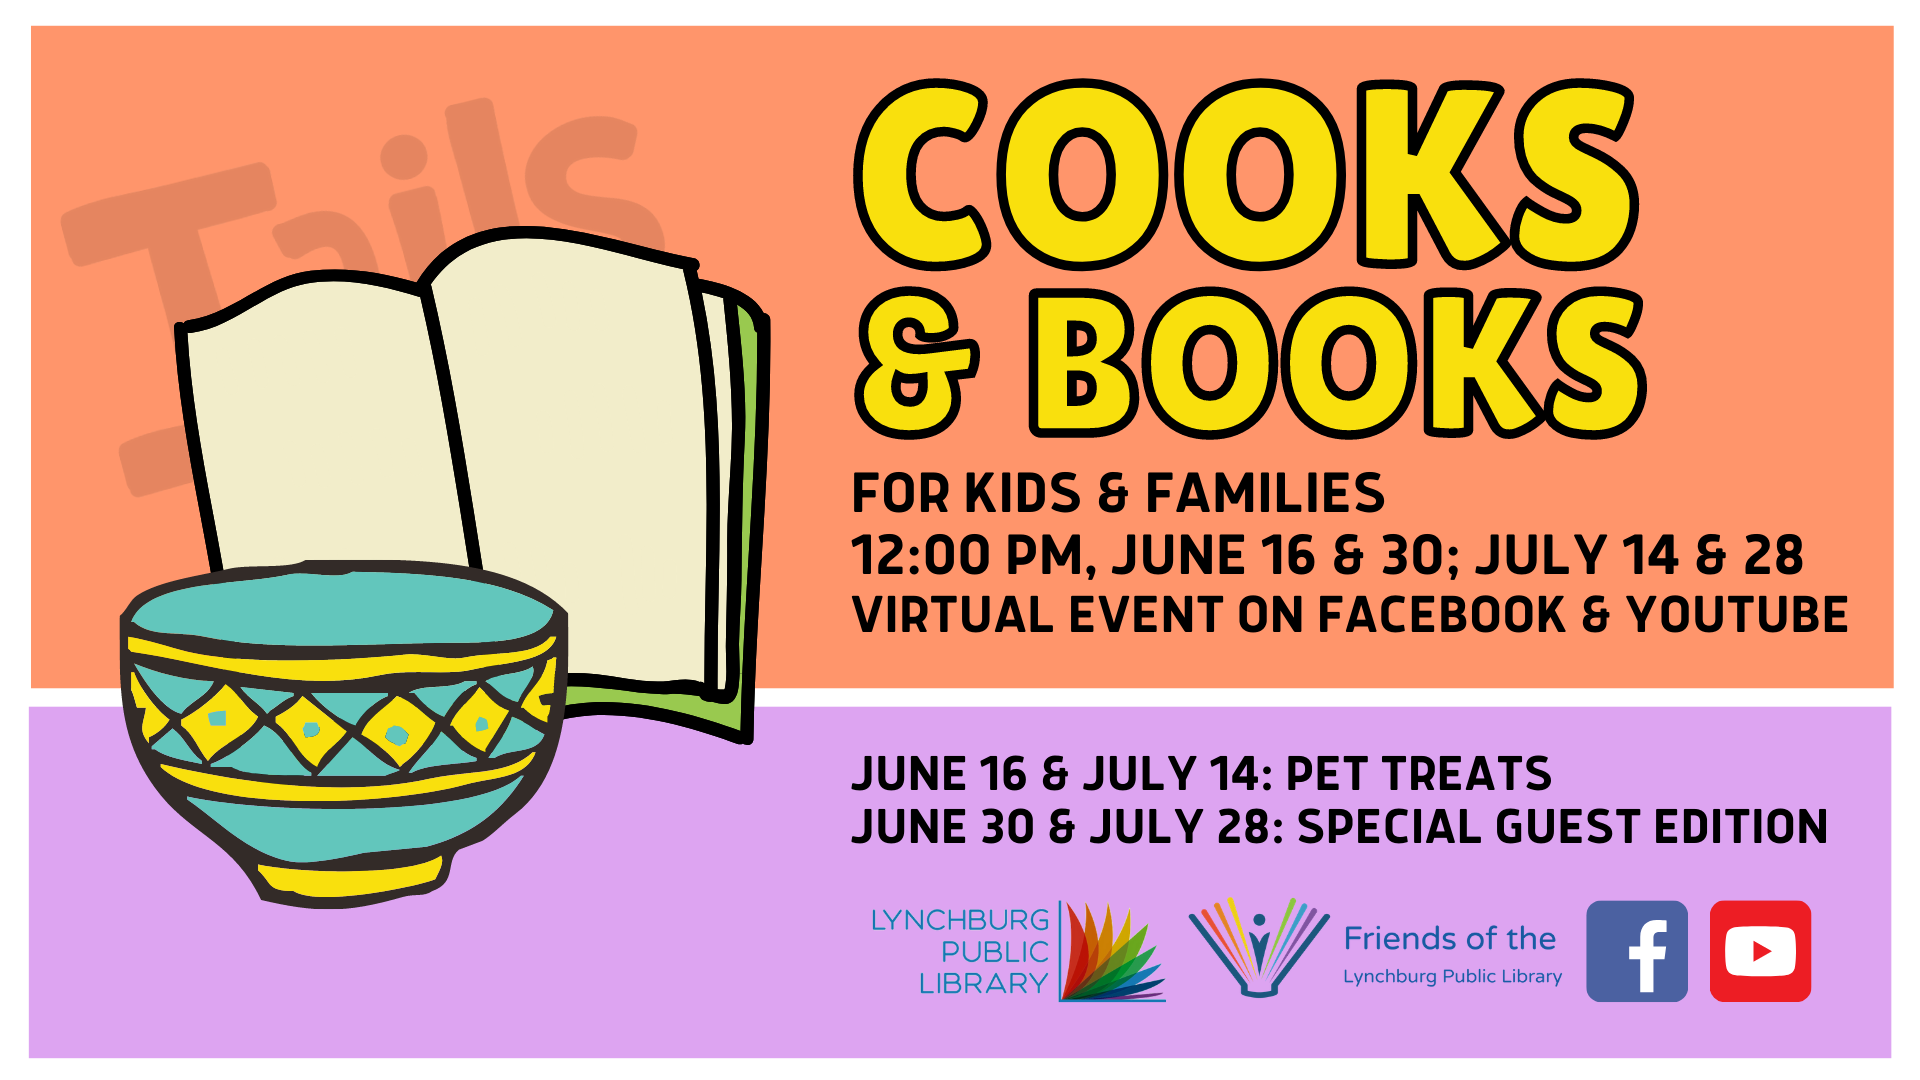 Image contains a bowl and book on a colorful background. Text repeats the Cooks & Books event information.